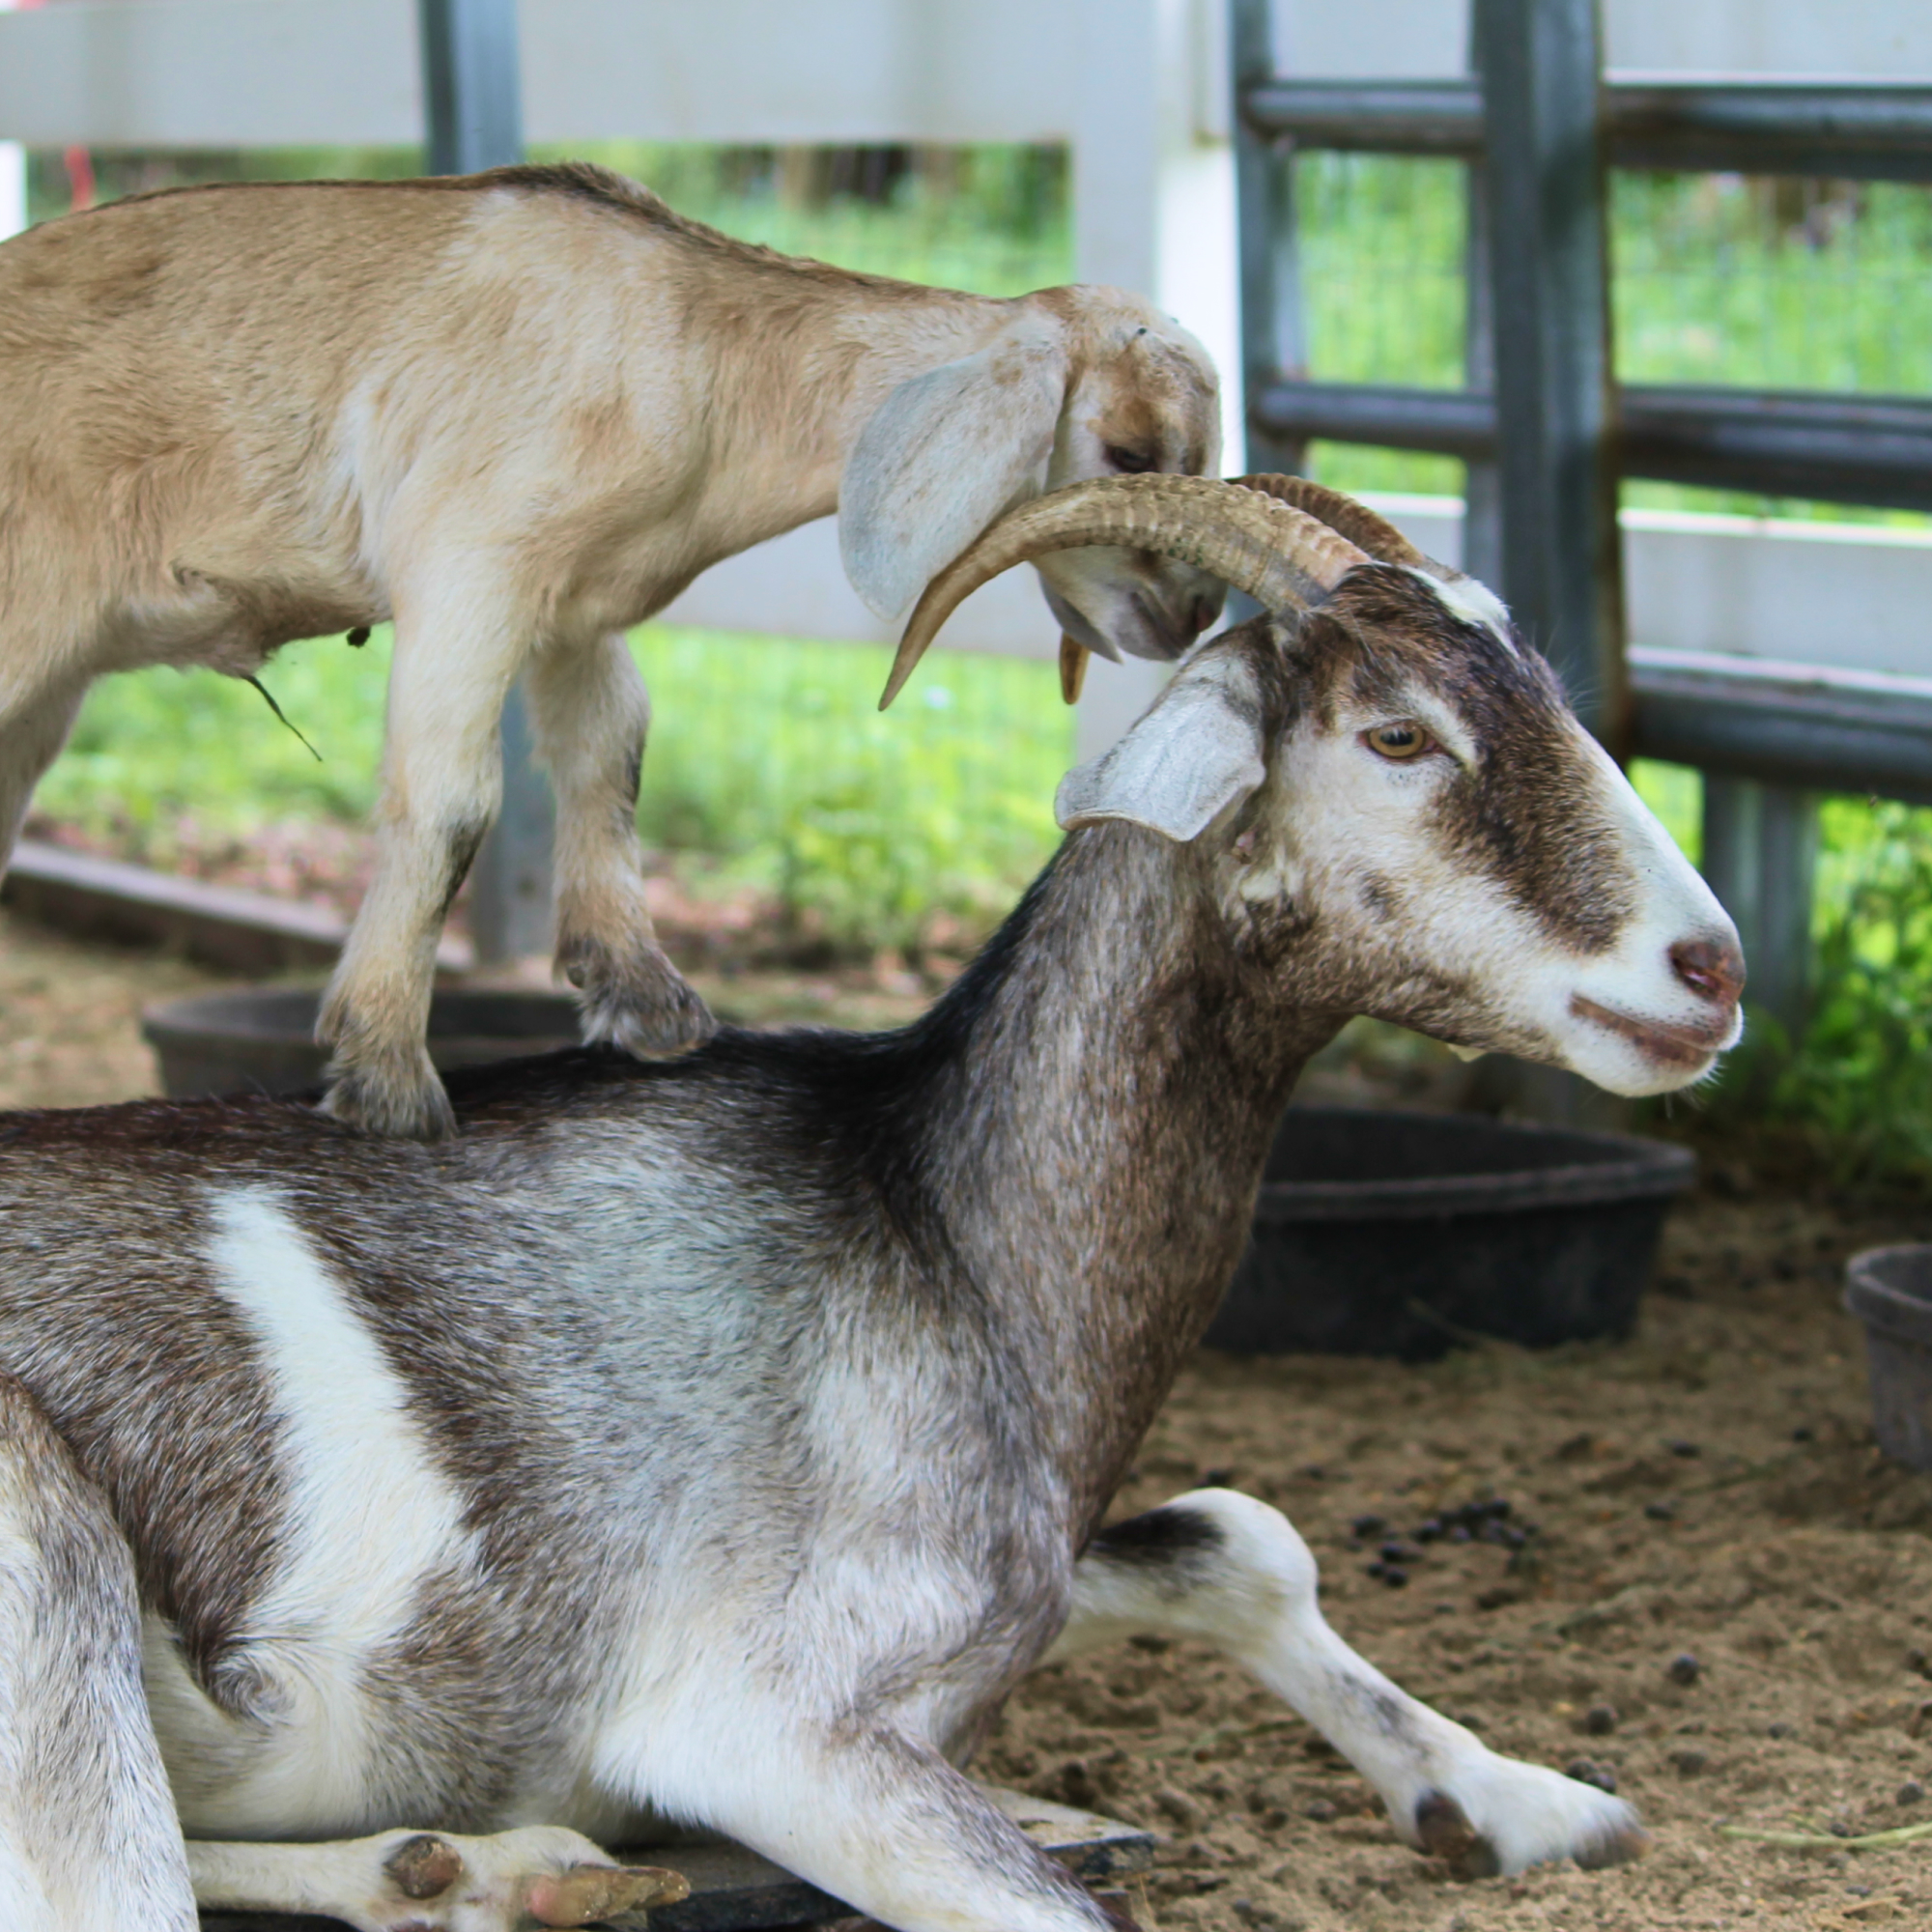 South Florida Society for the Prevention of Cruelty to Animals - Saving goats and their babies